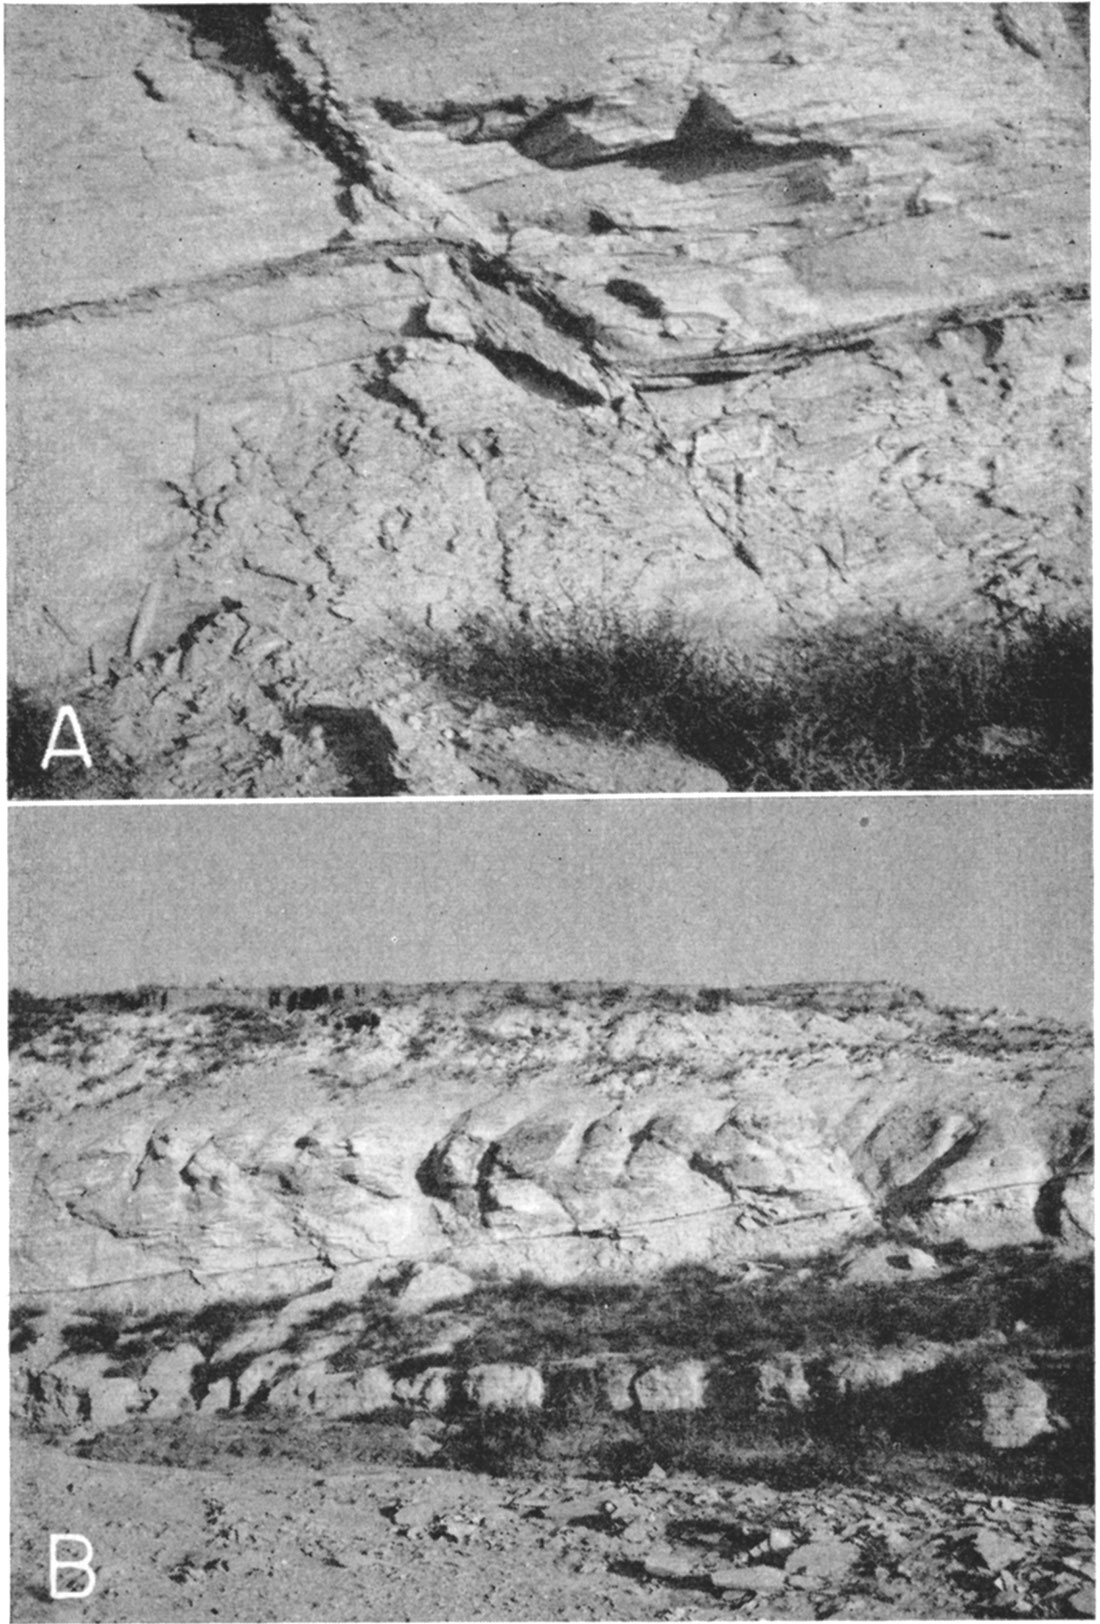 old black and white photos show fault in chalk; lower is view of entire hill